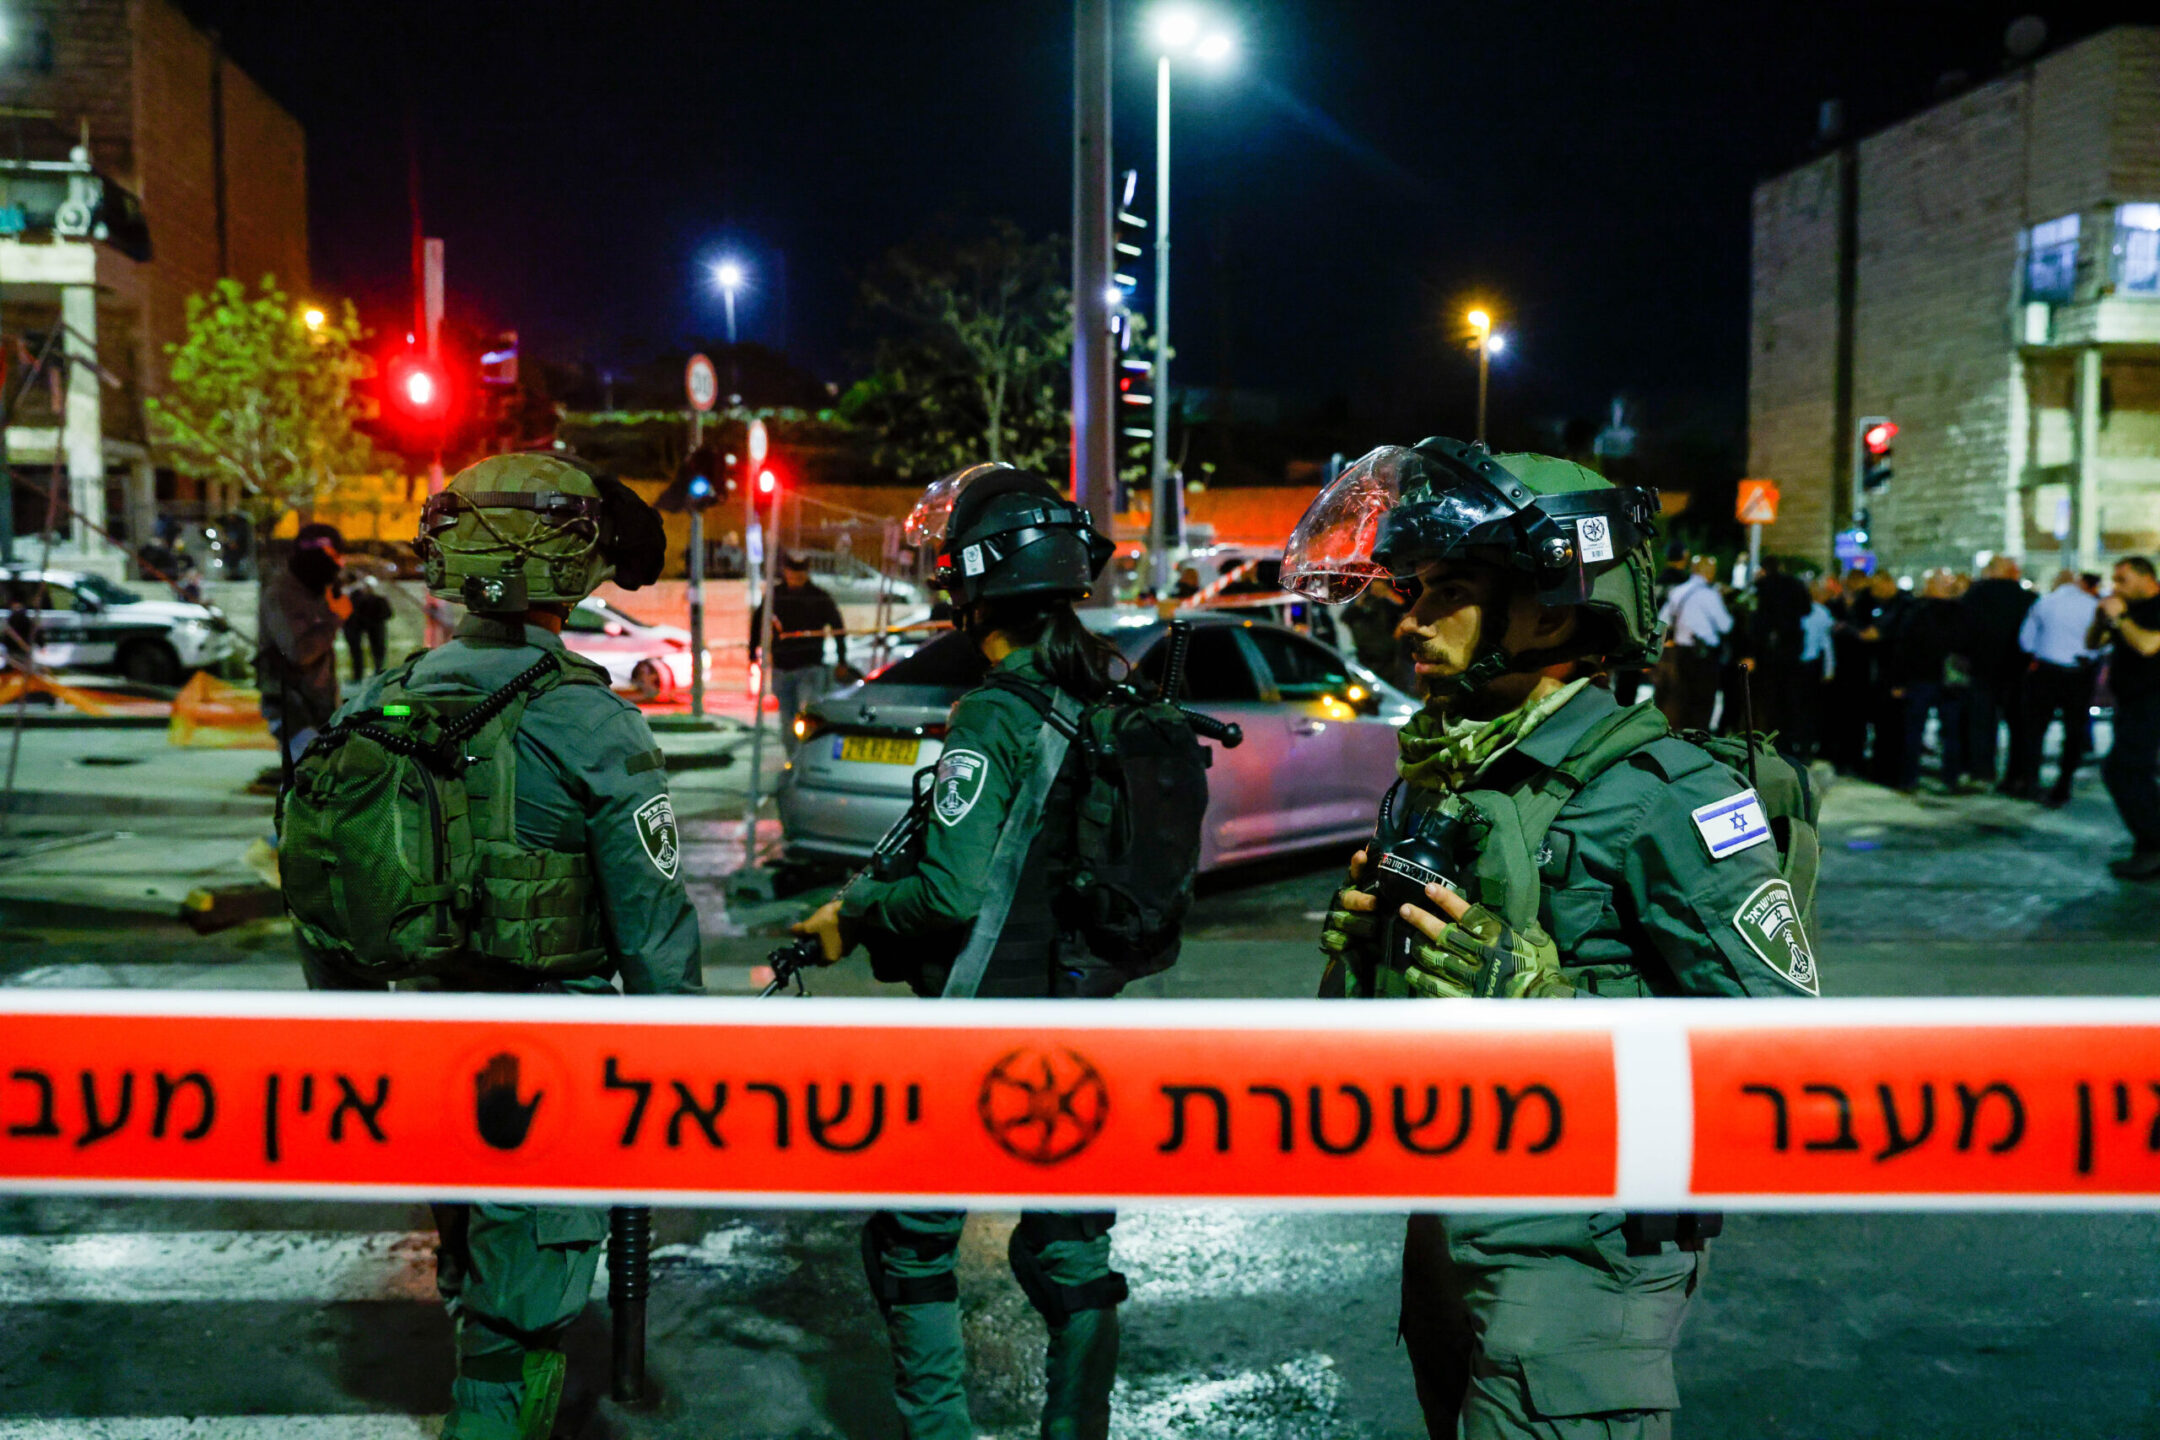 At least 7 dead, several wounded in Shabbat shooting attack on Jerusalem synagogue